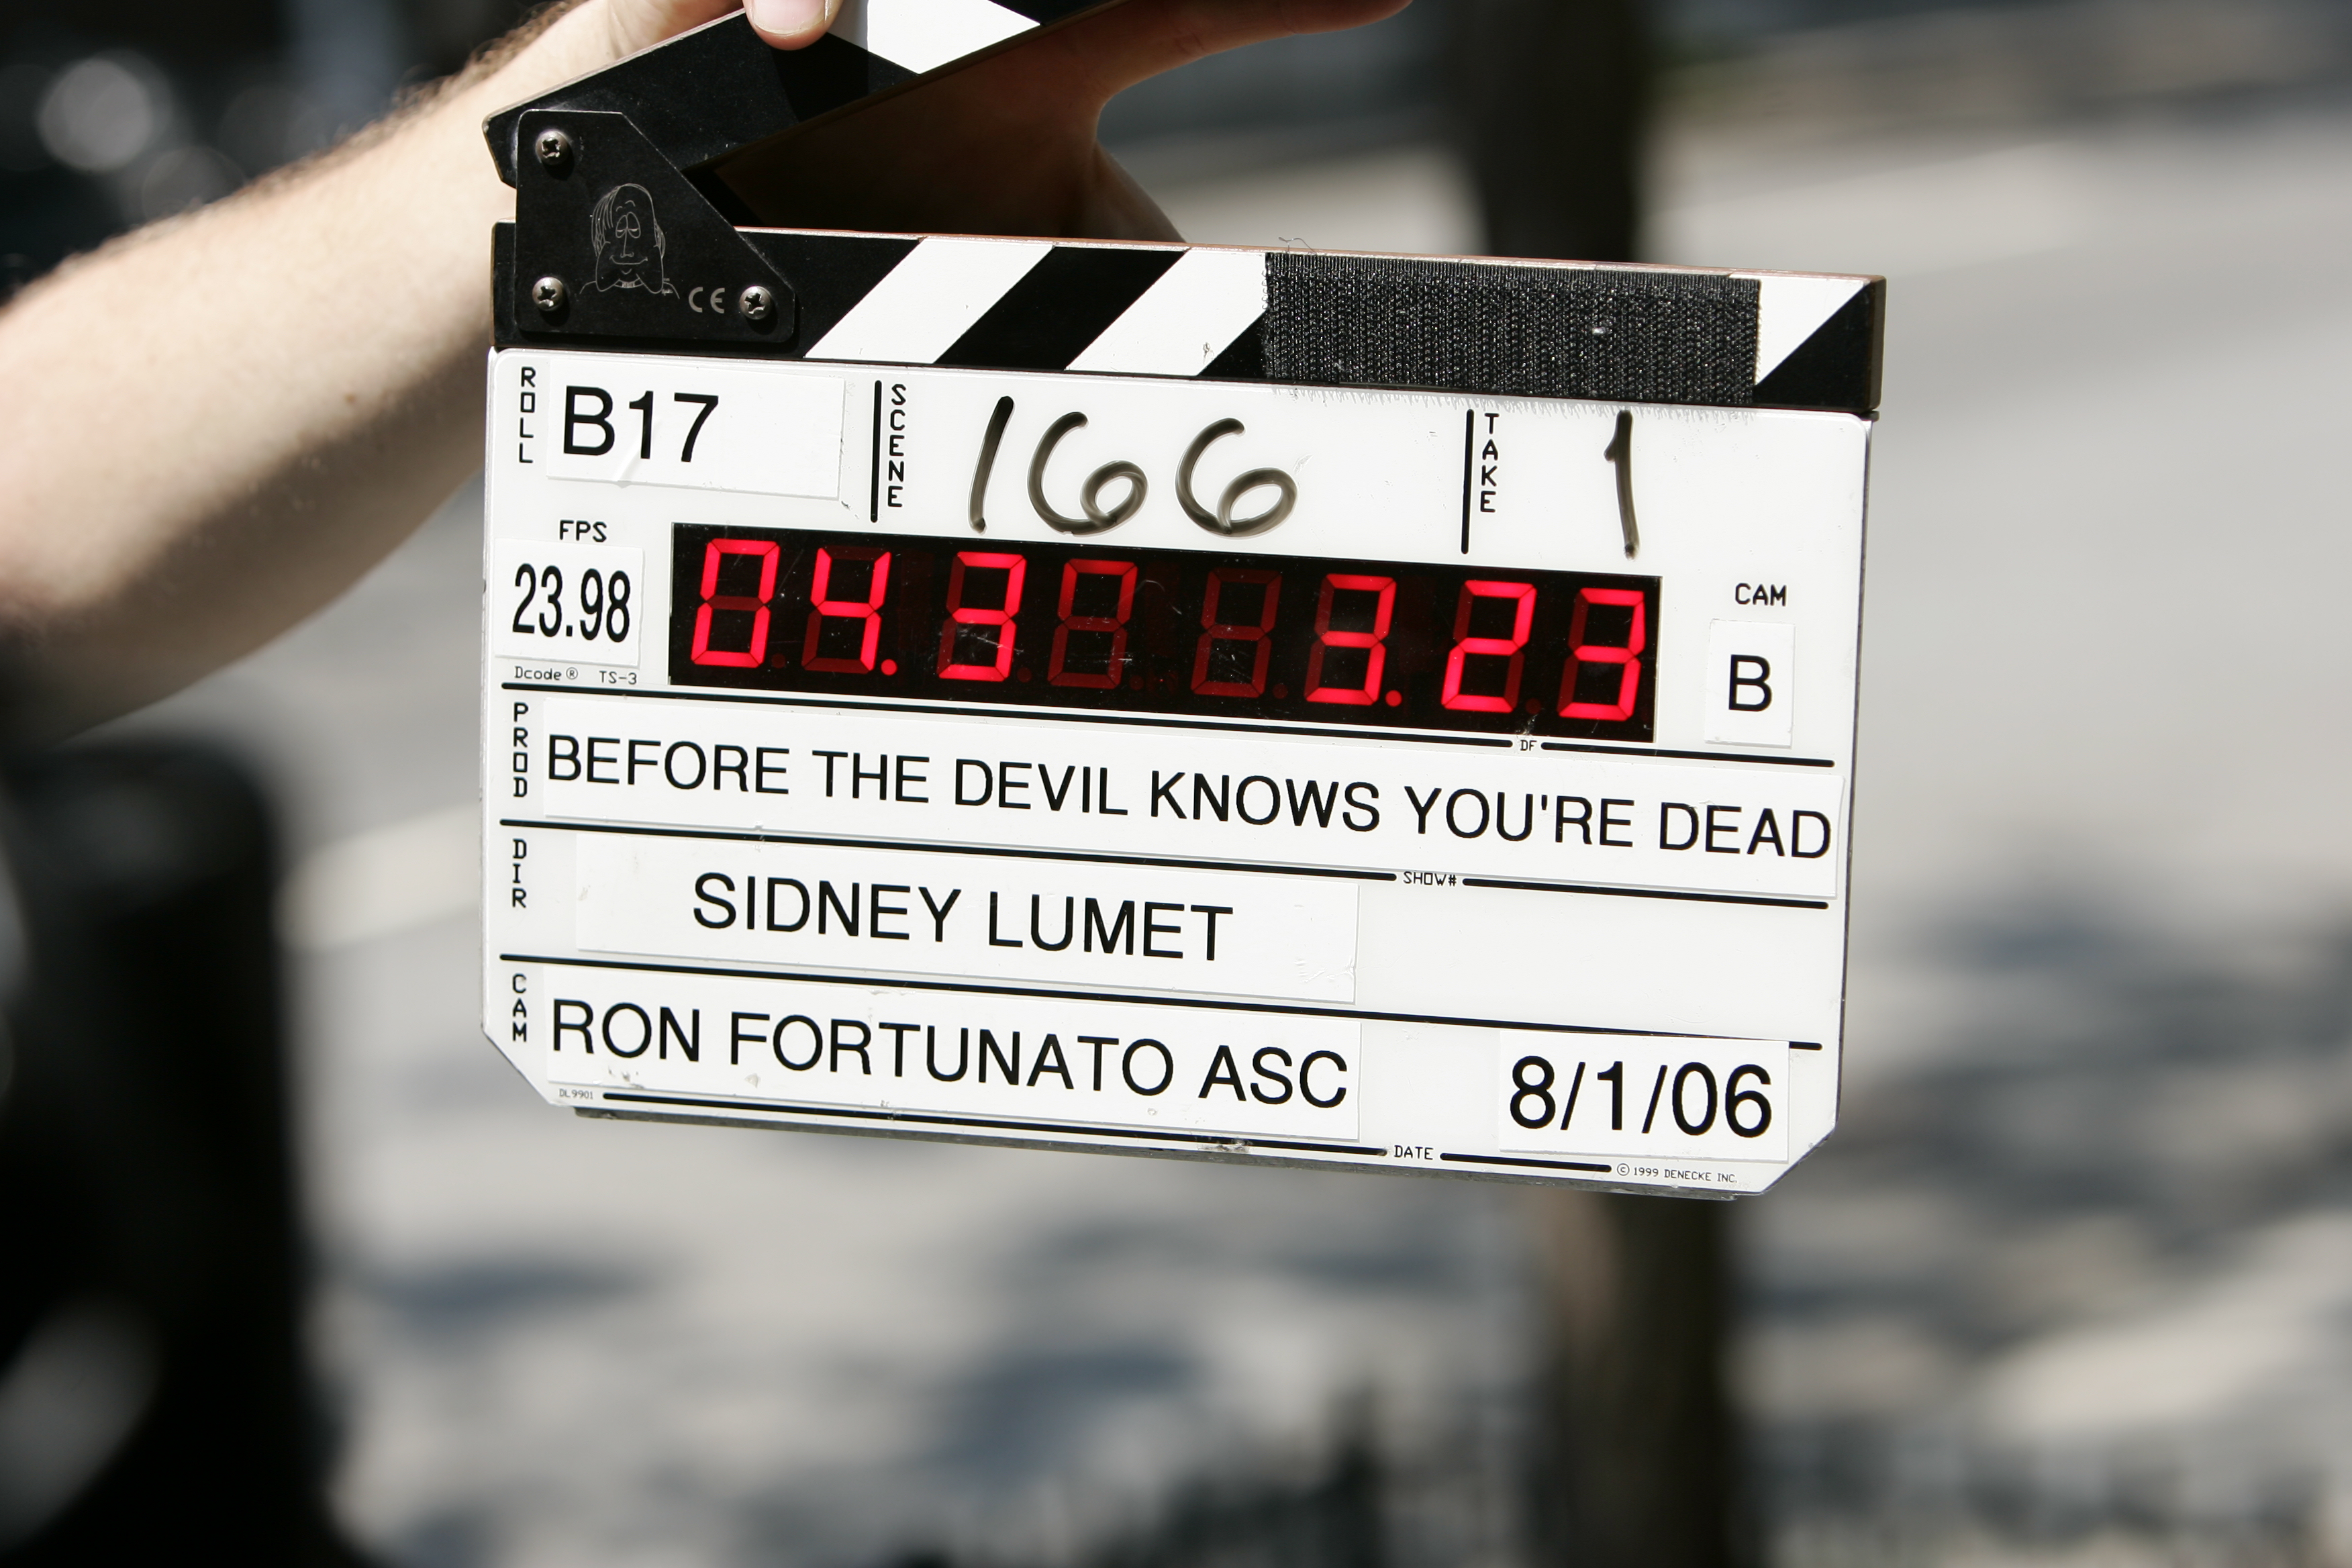 Ist day of shooting Before The Devil Knows You're Dead